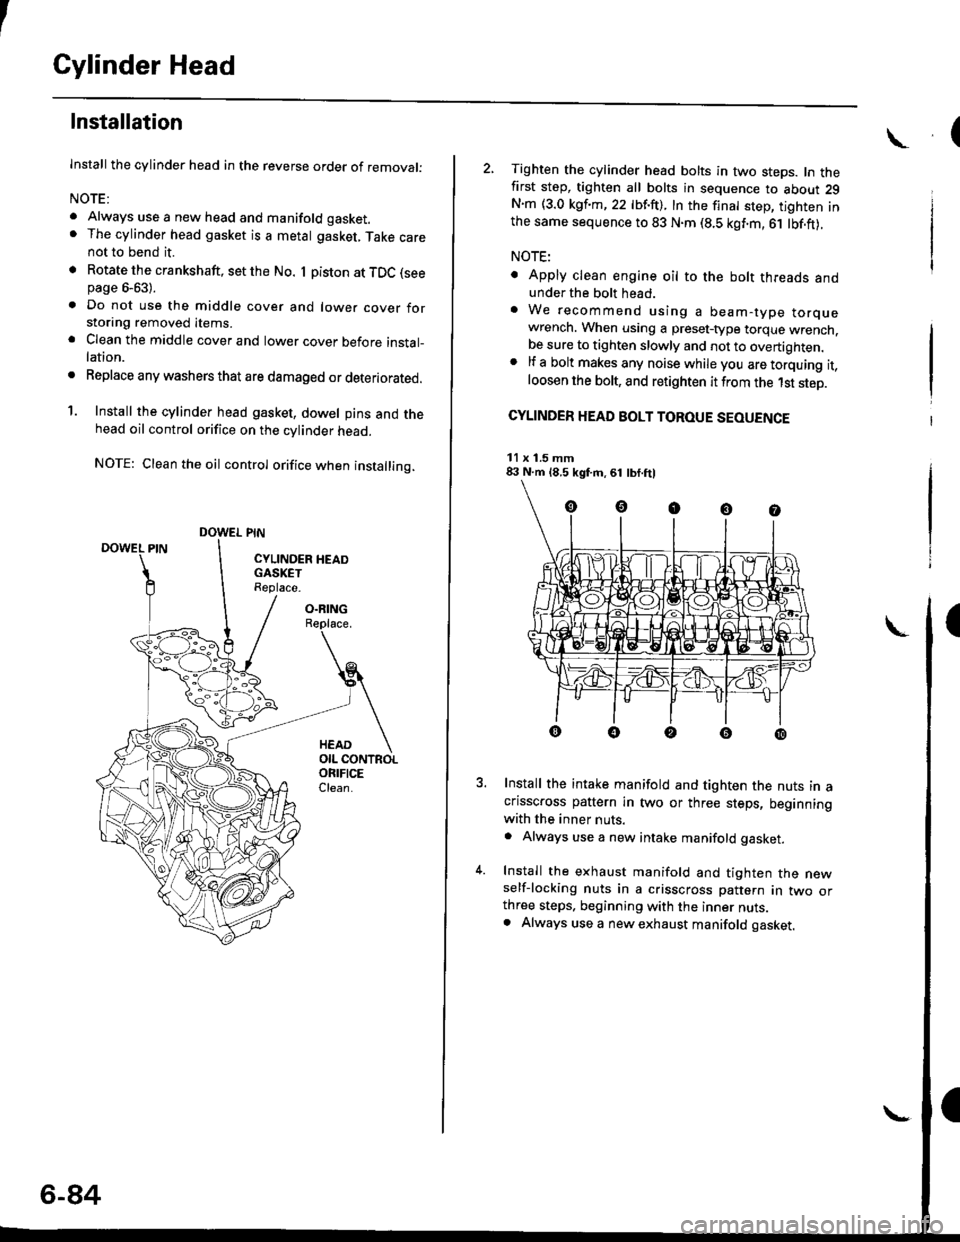 HONDA CIVIC 2000 6.G Workshop Manual I
Cylinder Head
Installation
lnstall the cylinder head in the reverse order of removal:
NOTE:
. Always use a new head and manifold gasket.. The cylinder head gasket is a metal gasket, Take carenot to 